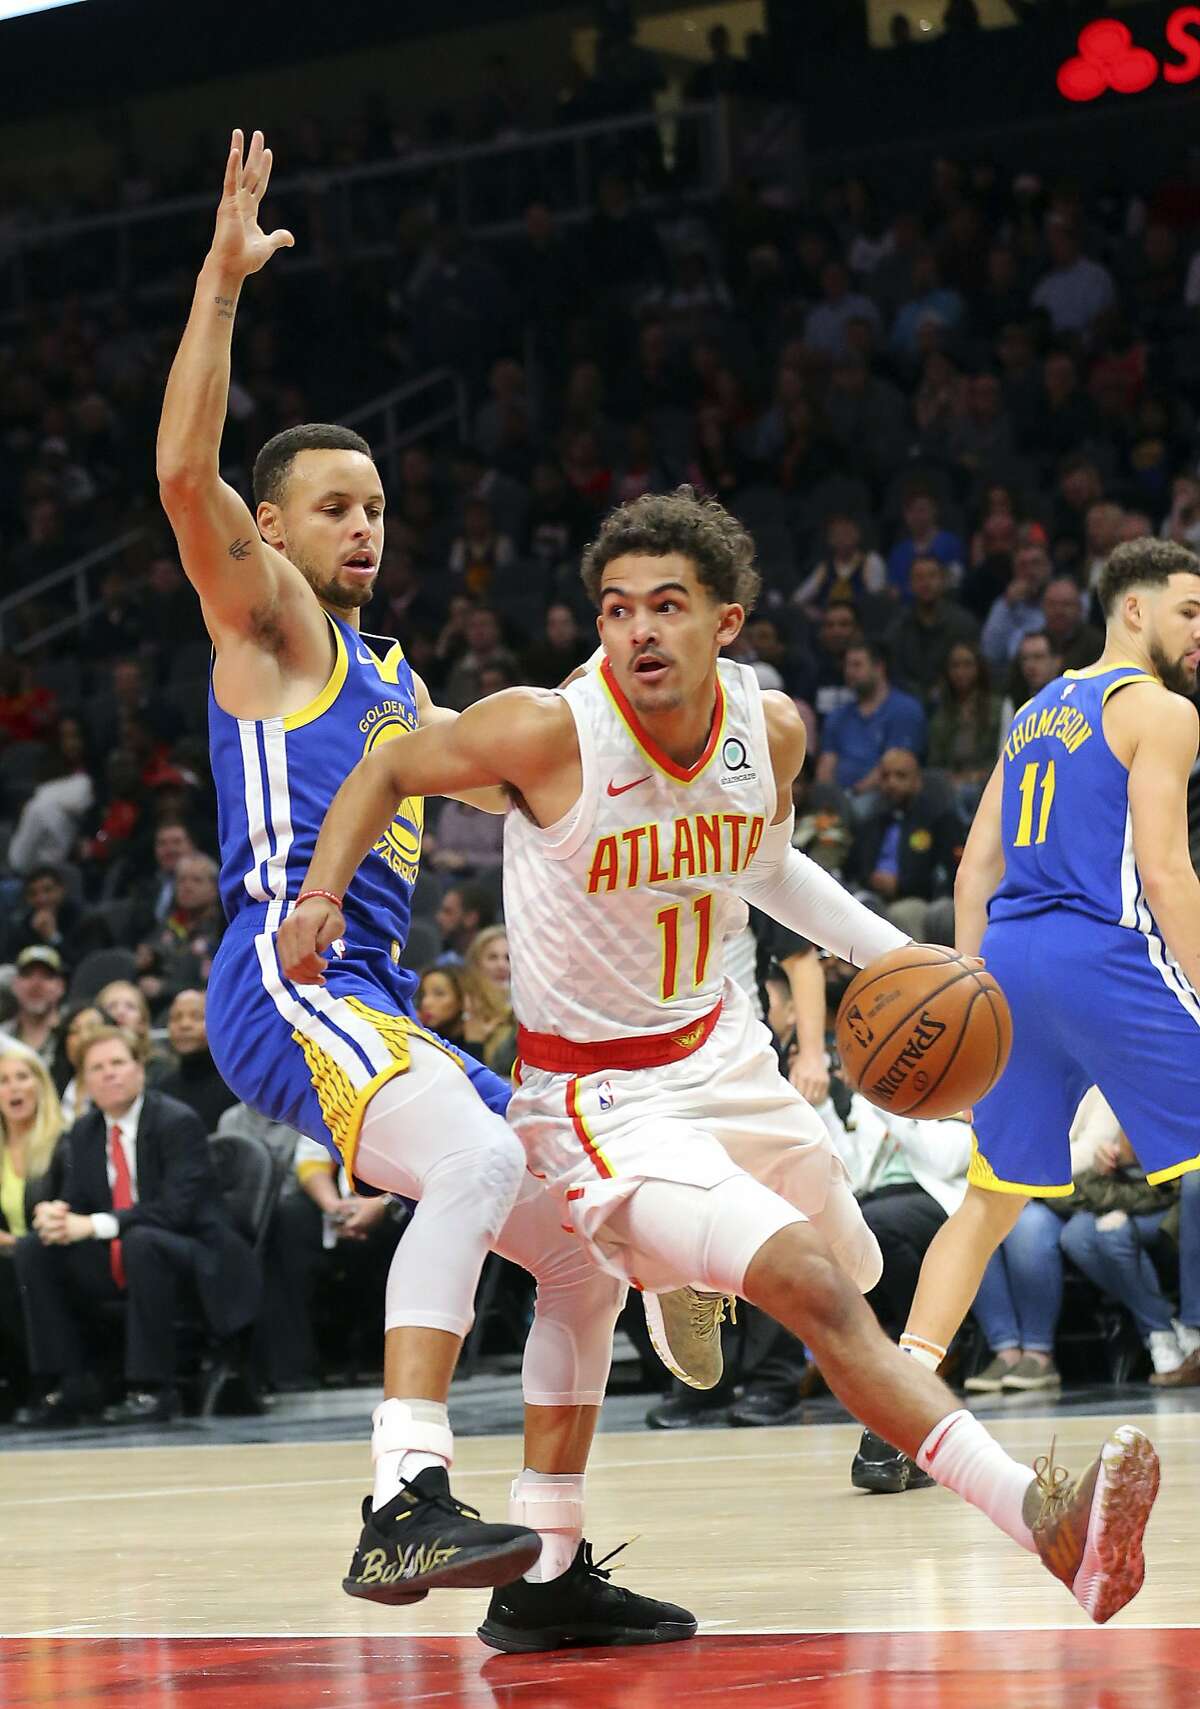 Atlanta Hawks guard Trae Young (11) drives against Golden State Warriors guard Stephen Curry (30) during the first half of an NBA basketball game Monday, Dec. 3, 2018, in Atlanta. (AP Photo/John Bazemore)